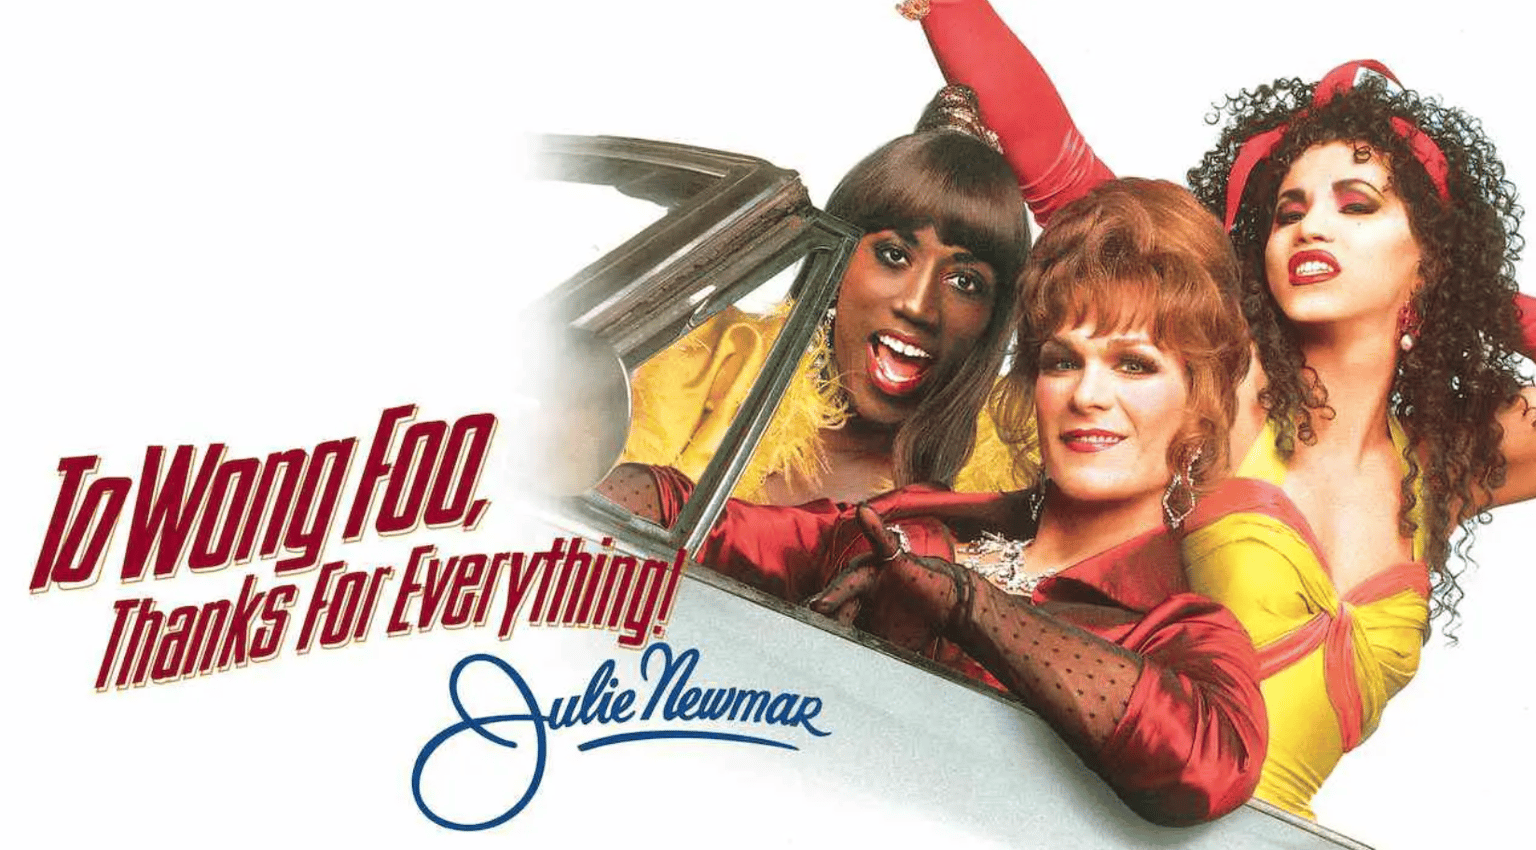 To Wong Foo, Thanks for Everything! Julie Newmar